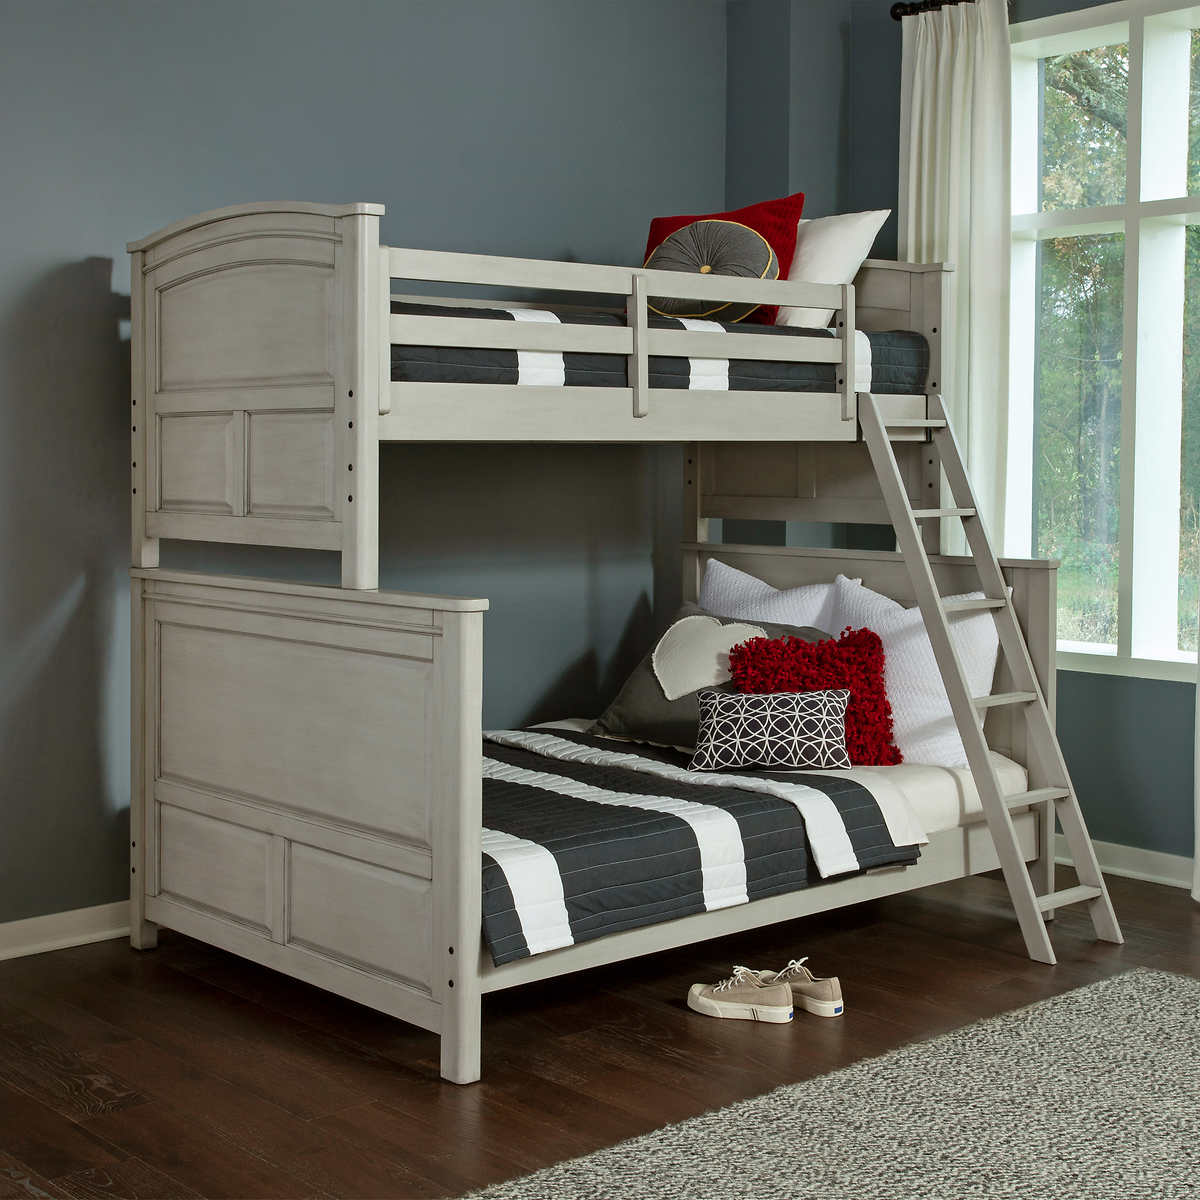 Wingate Twin Over Full Bunk Bed Costco, Bunk Beds With Bottom Safety Rail